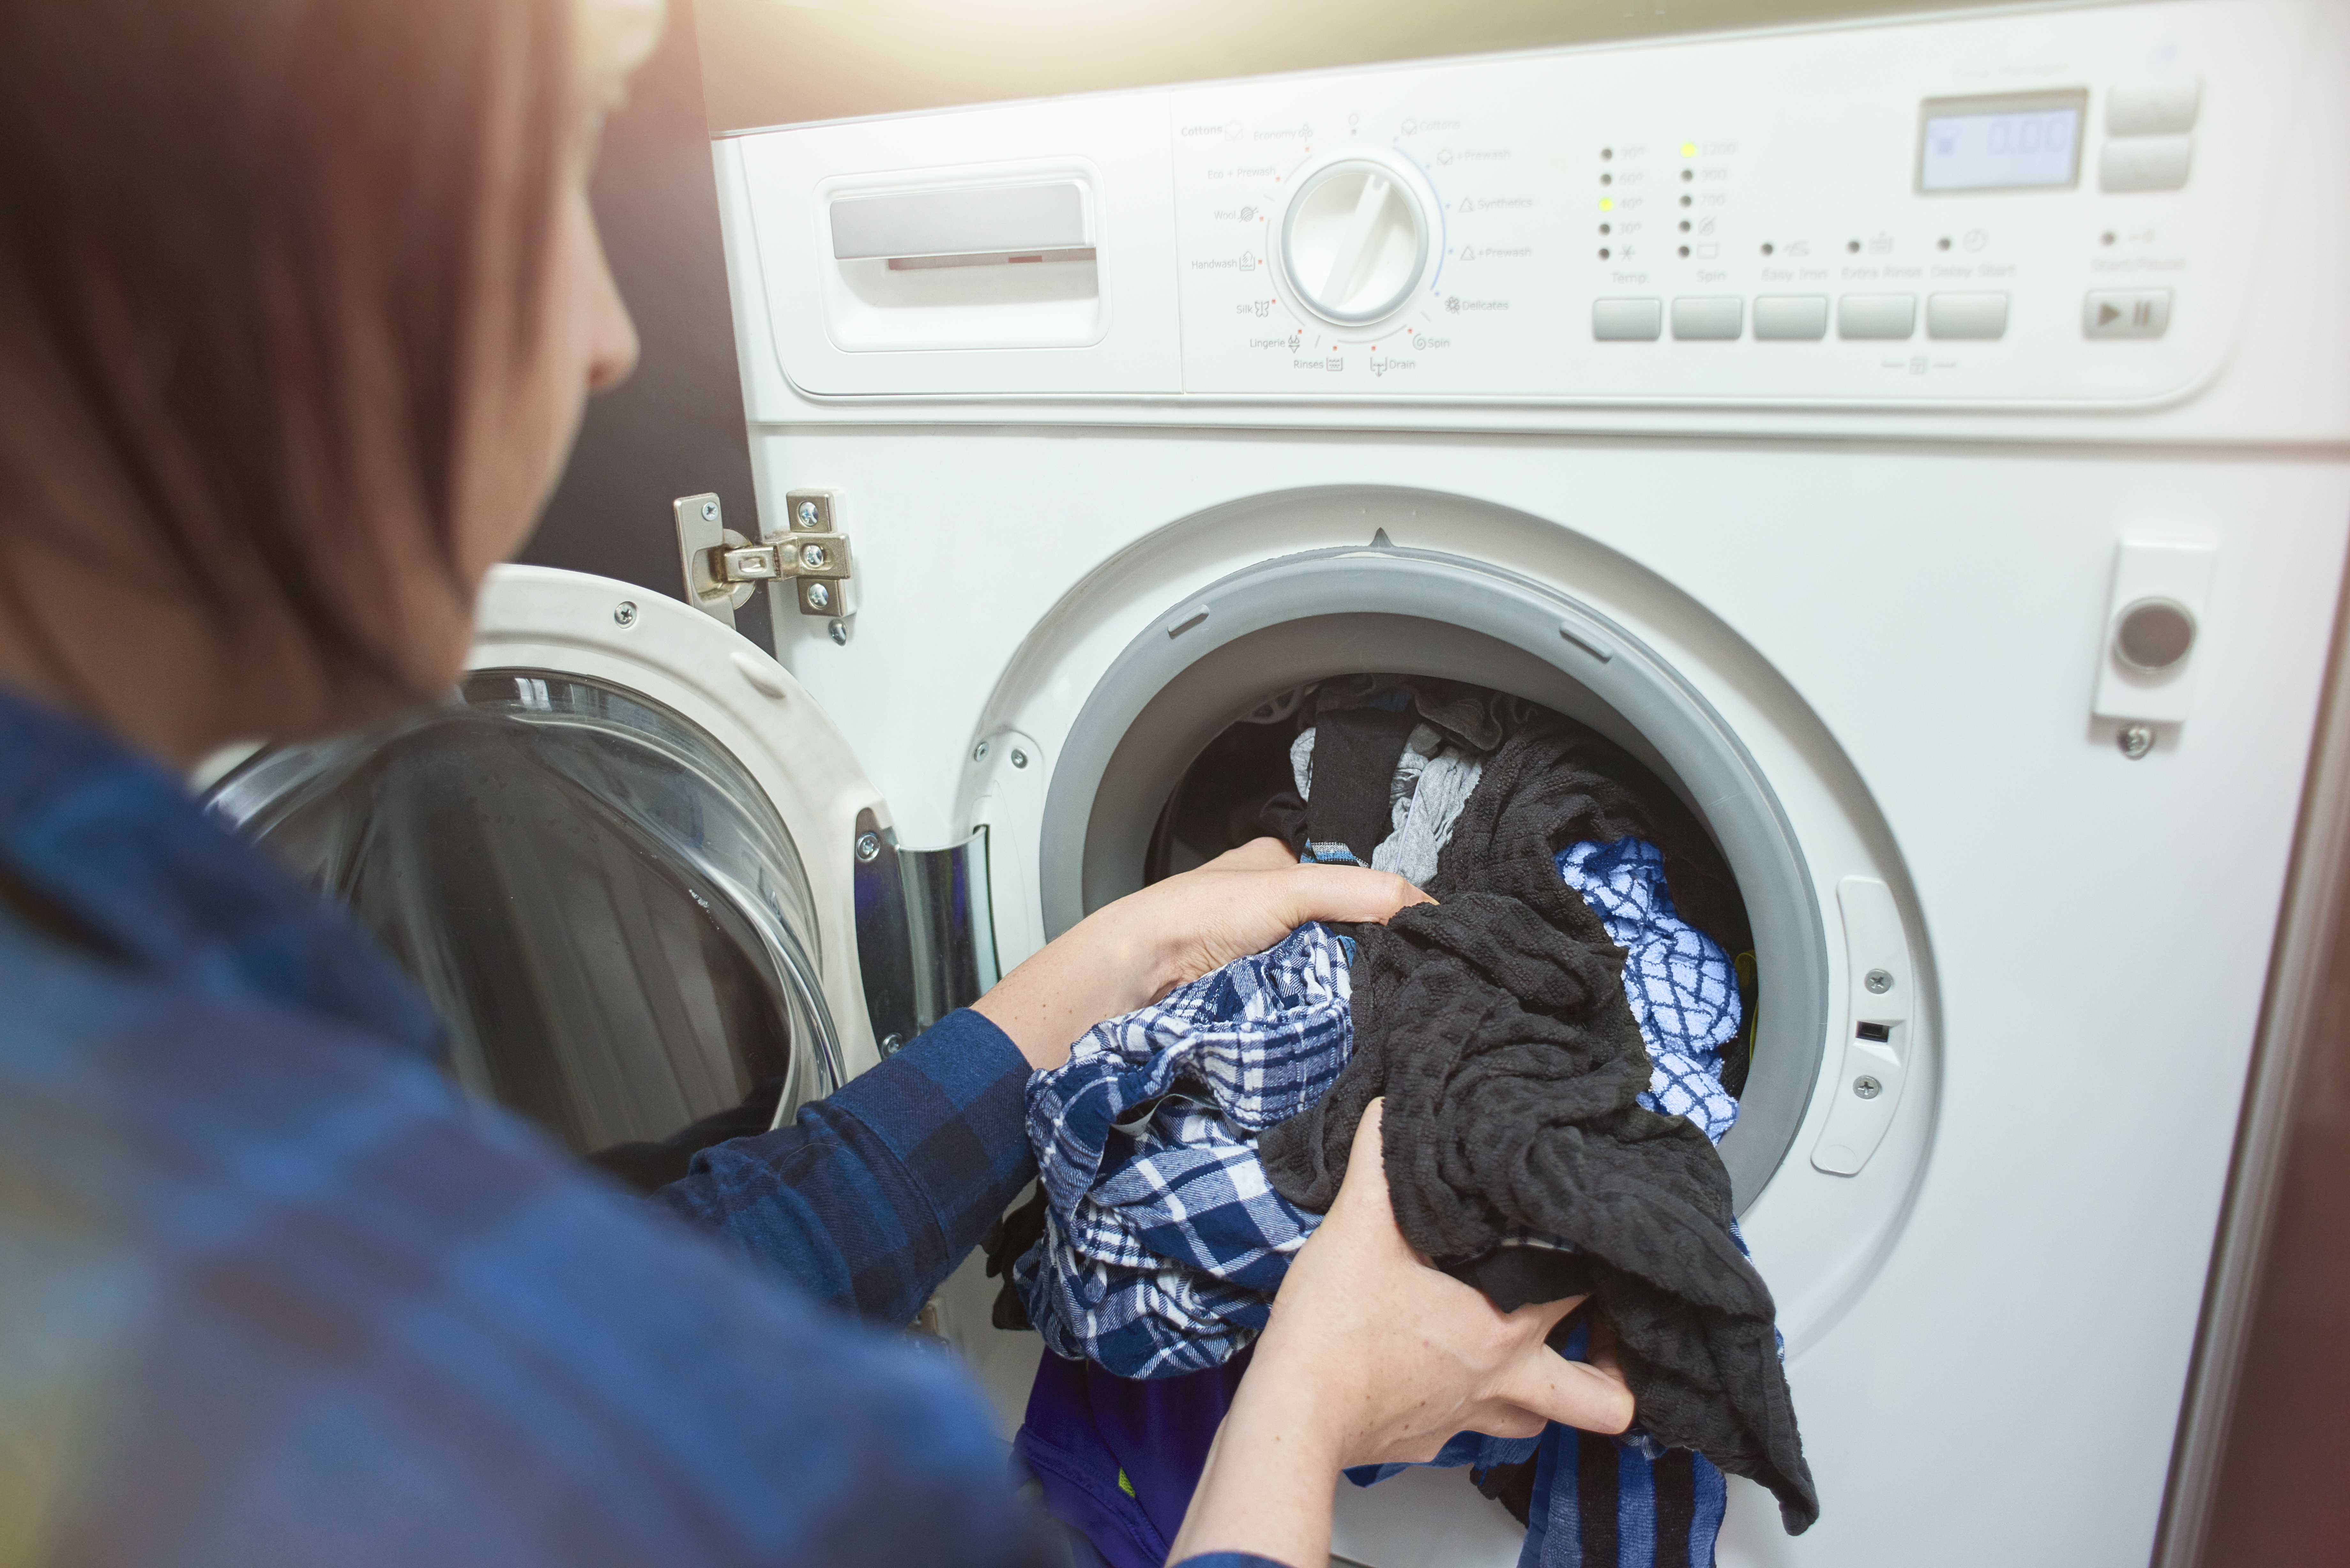 Woman unloads clothes from front load washer